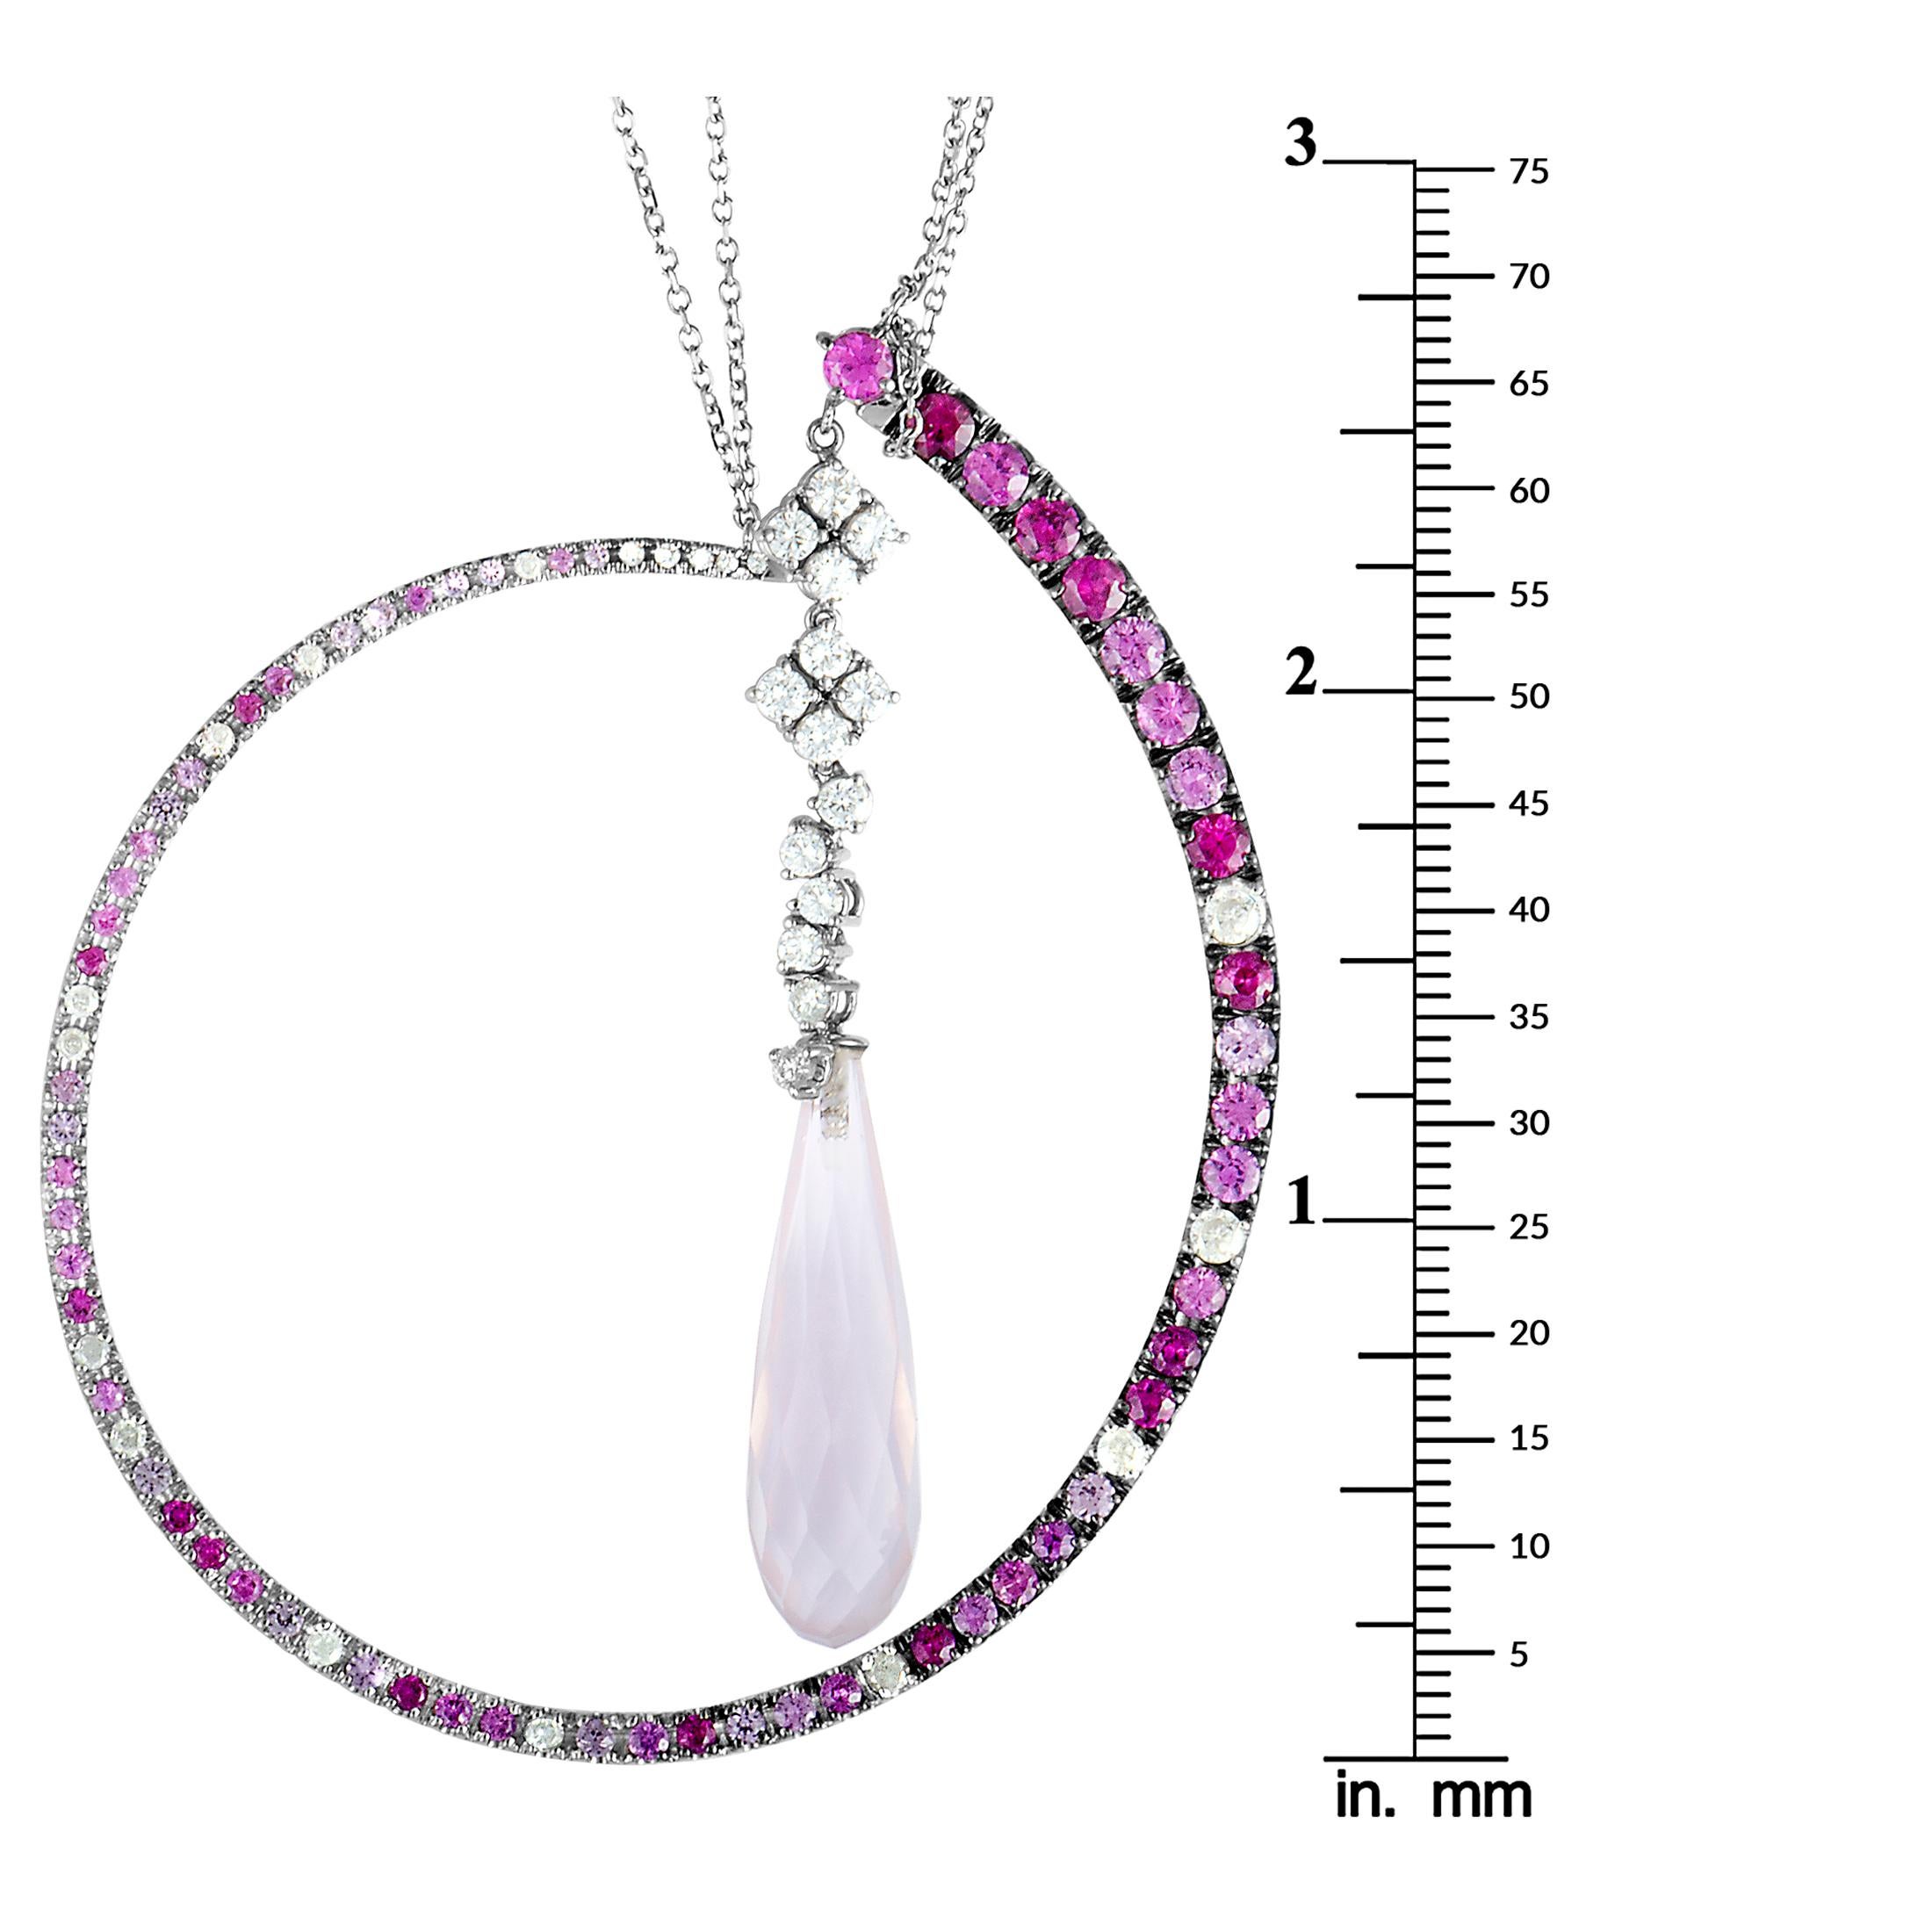 This Roberta Porrati necklace is made of 18K white gold and set with white diamonds, pink sapphires and a pink quartz. The quartz weighs 12.00 carats while the diamonds and the sapphires amount to 1.04 and 2.75 carats respectively.

The necklace